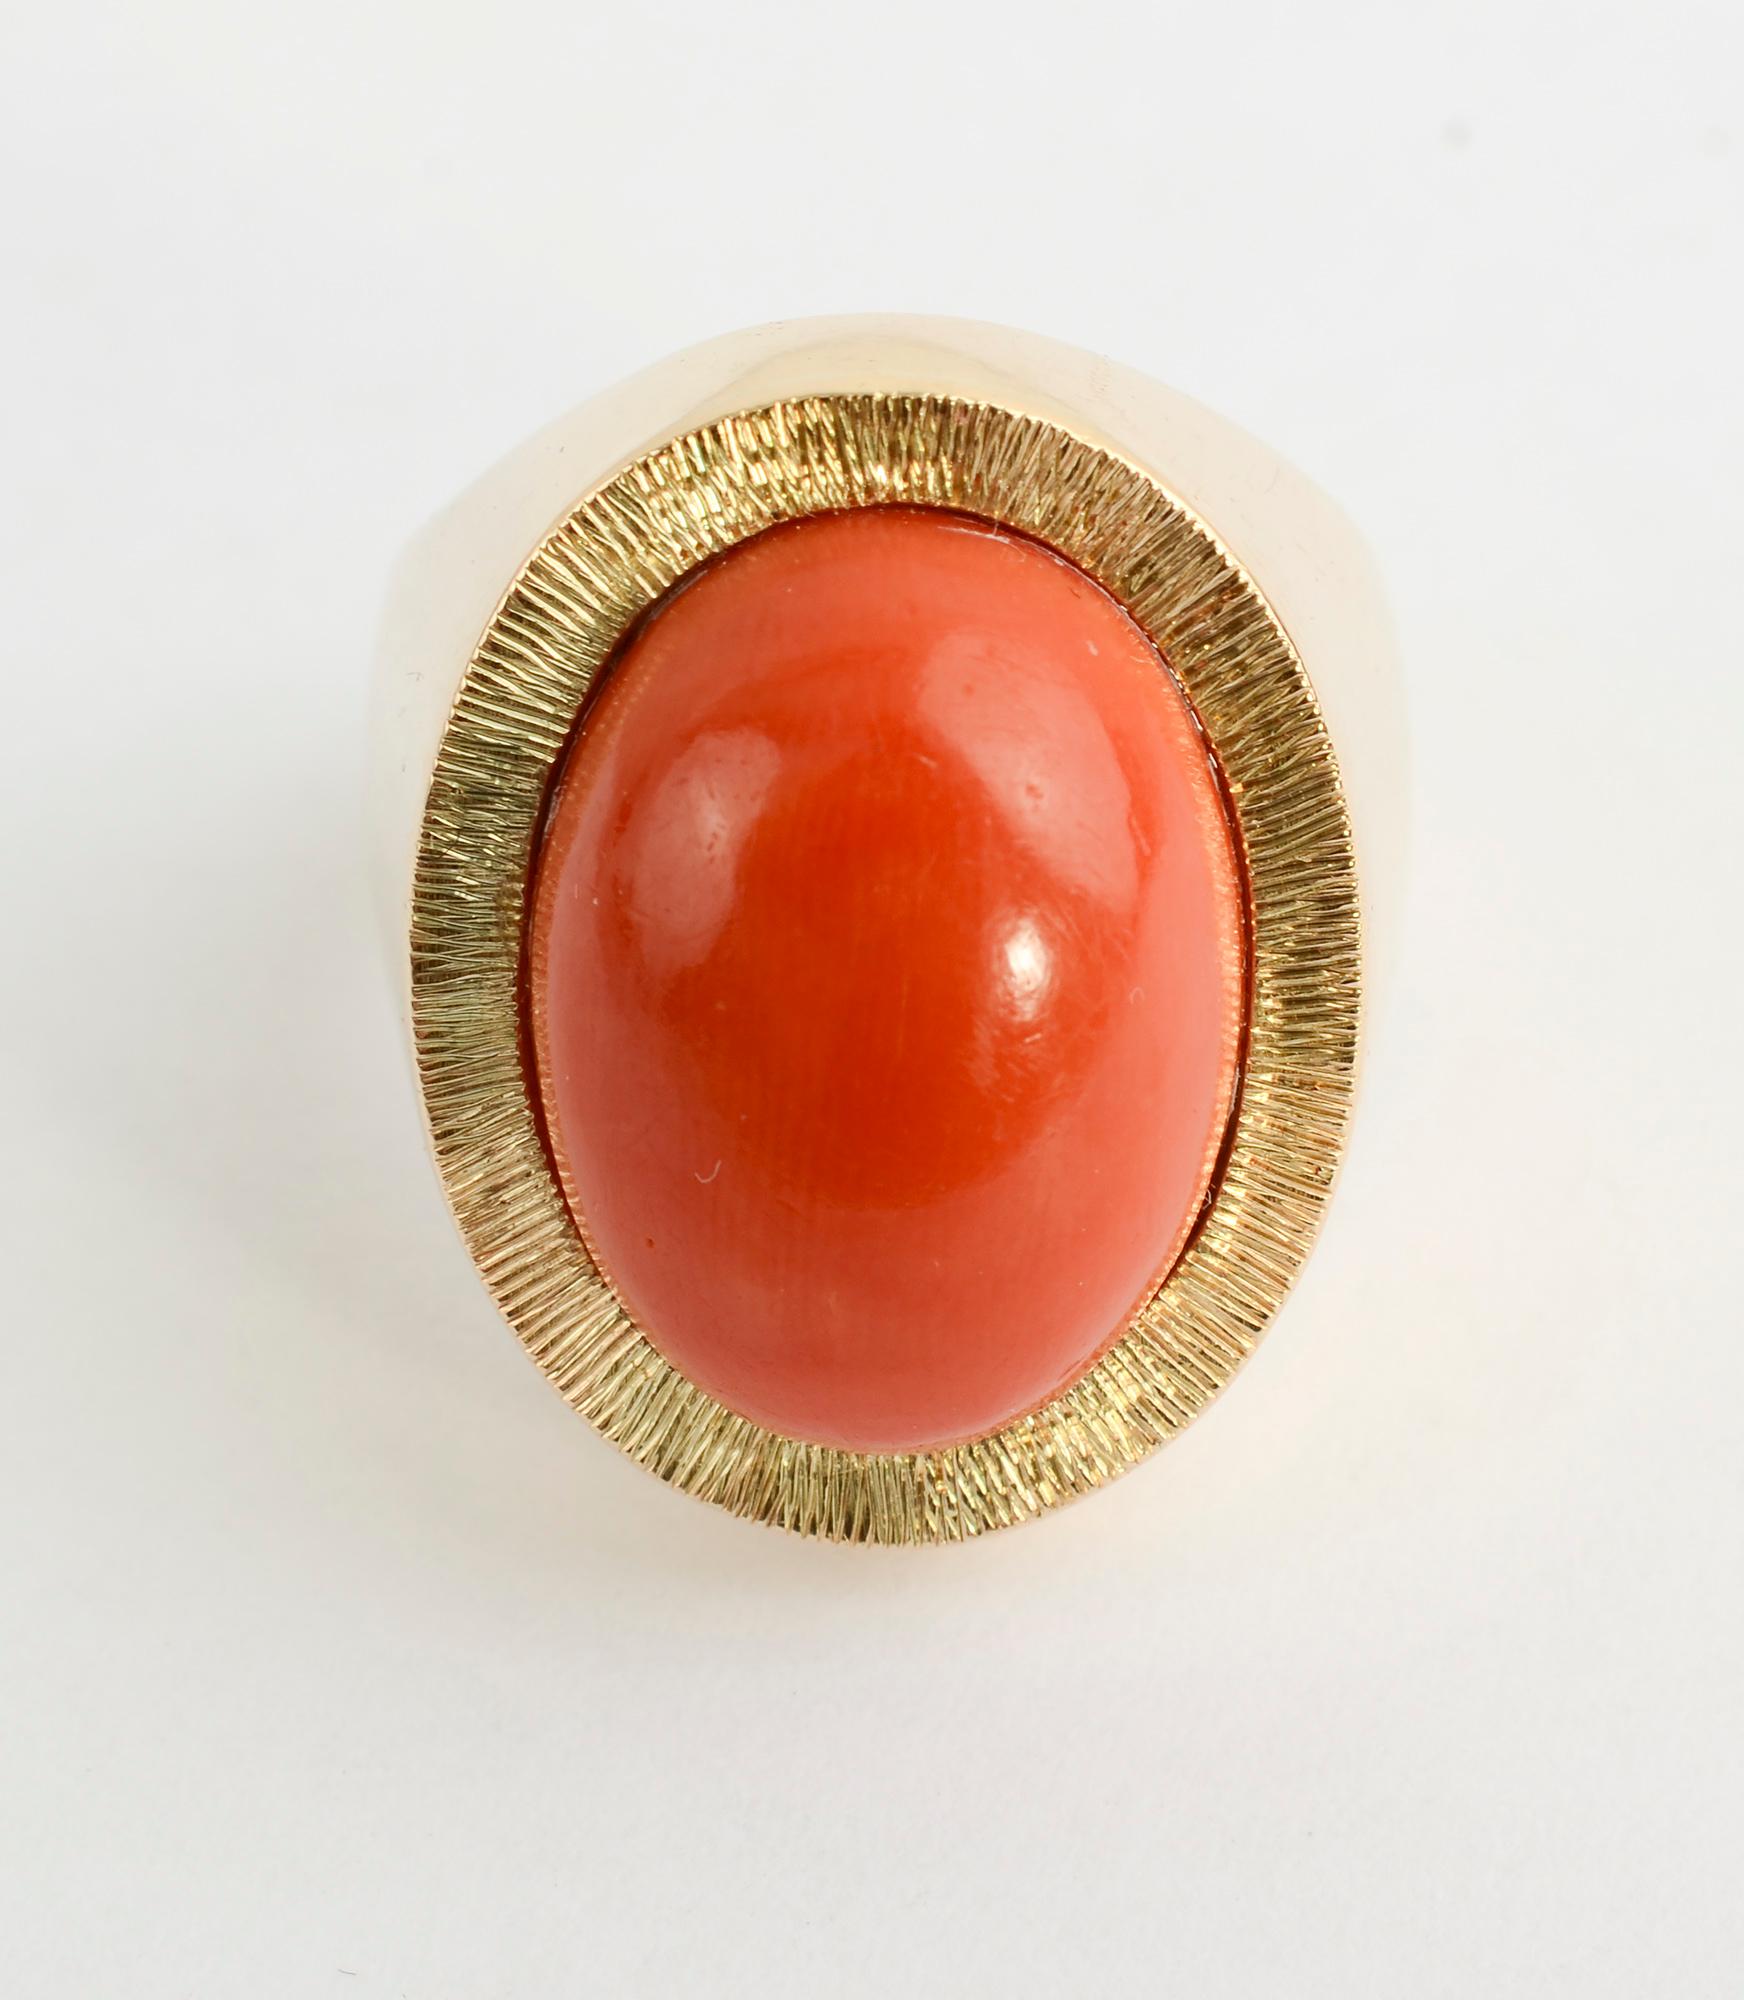 This handsome, simple and bold ring would work equally well on a man or woman.
It has a beautifully colored coral stone measuring 5/8